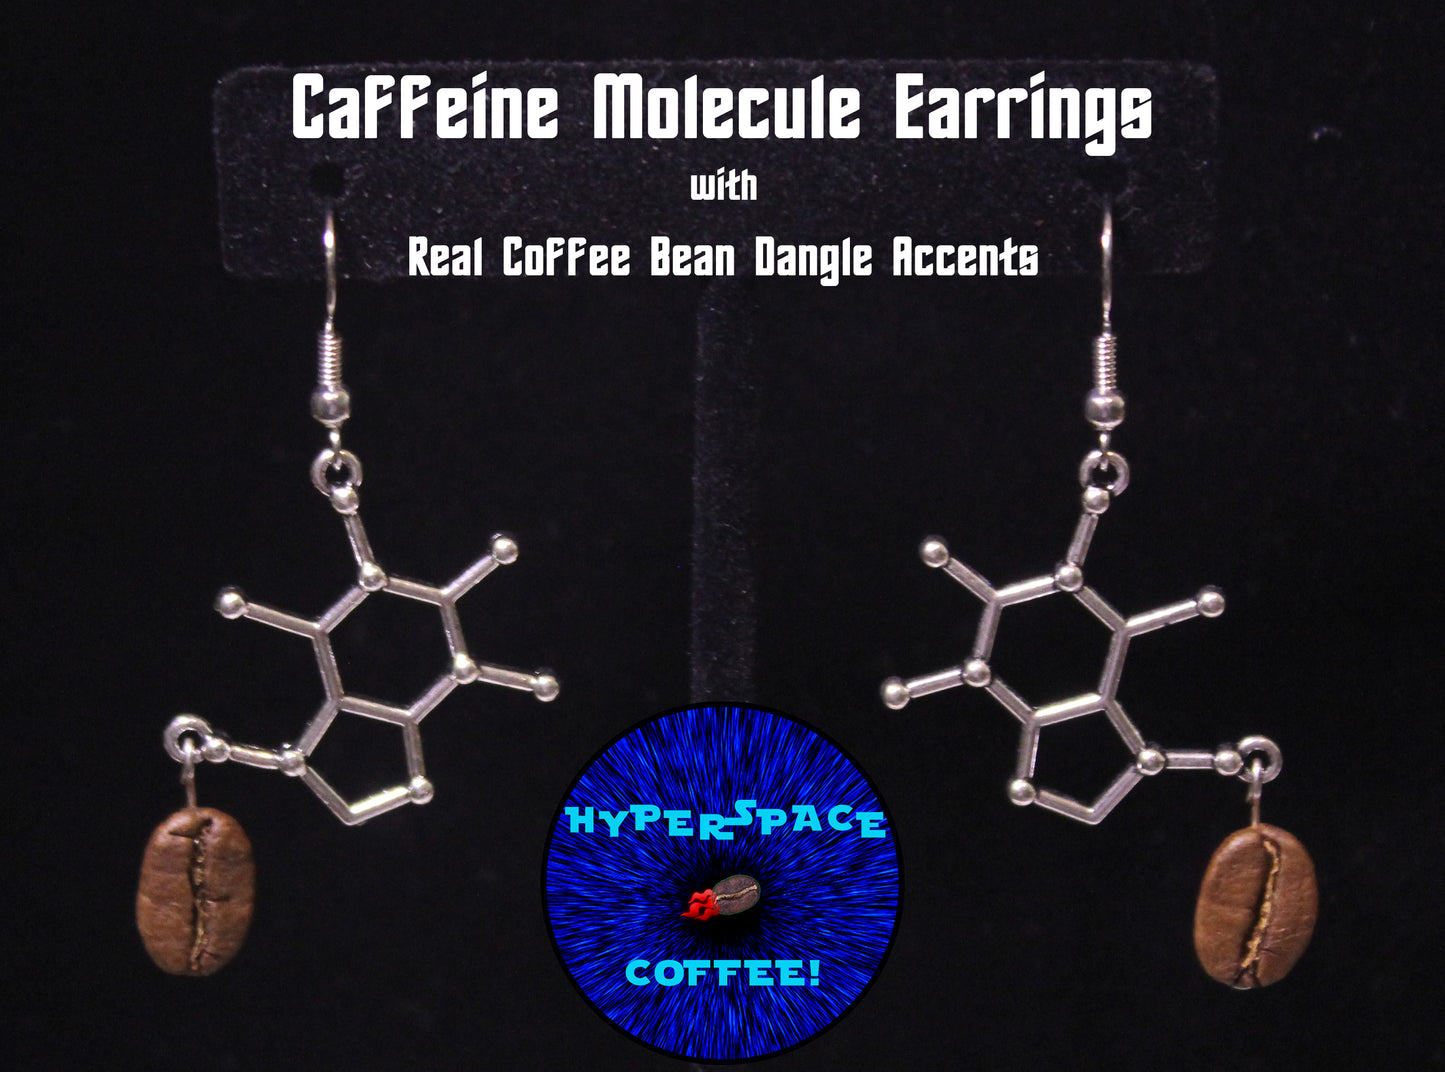 Caffeine Molecule Earrings with Real Coffee Bean Dangle Accents - Coffee and Science Gift, Coffee Earrings